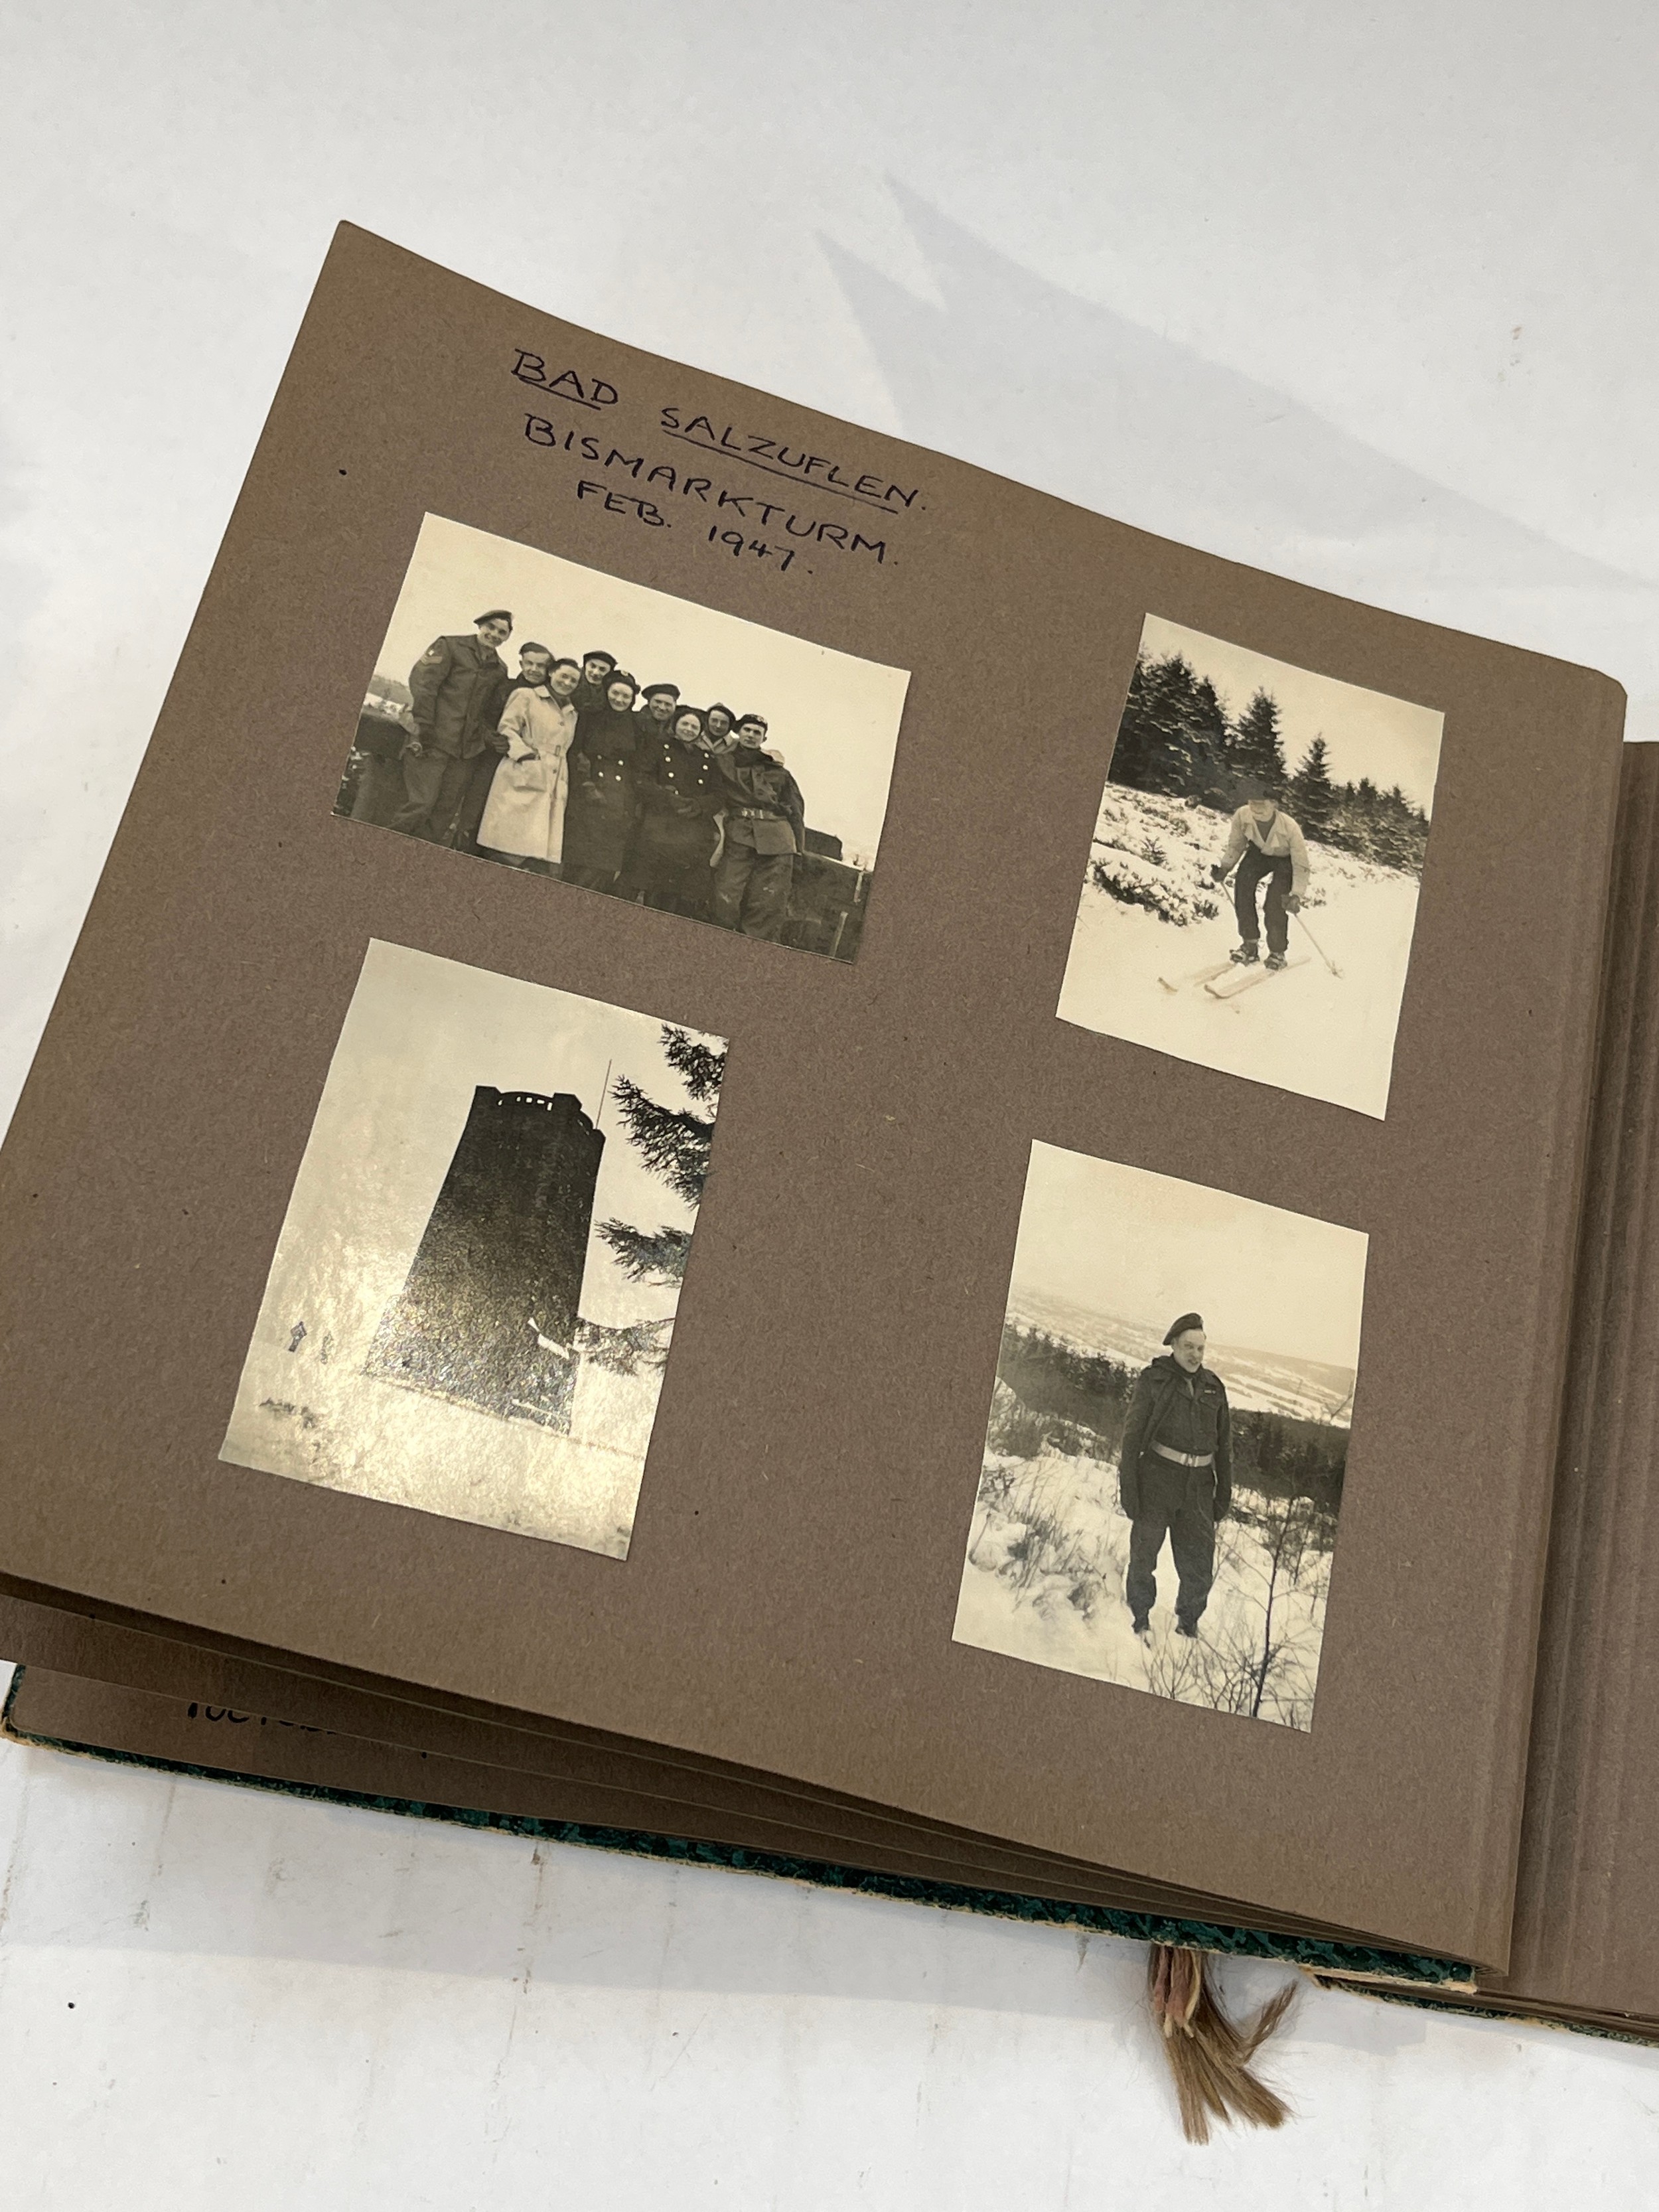 A B.A.O.R. (British Army of the Rhine) photo album covering period October 1946 - October 1947, - Image 3 of 3